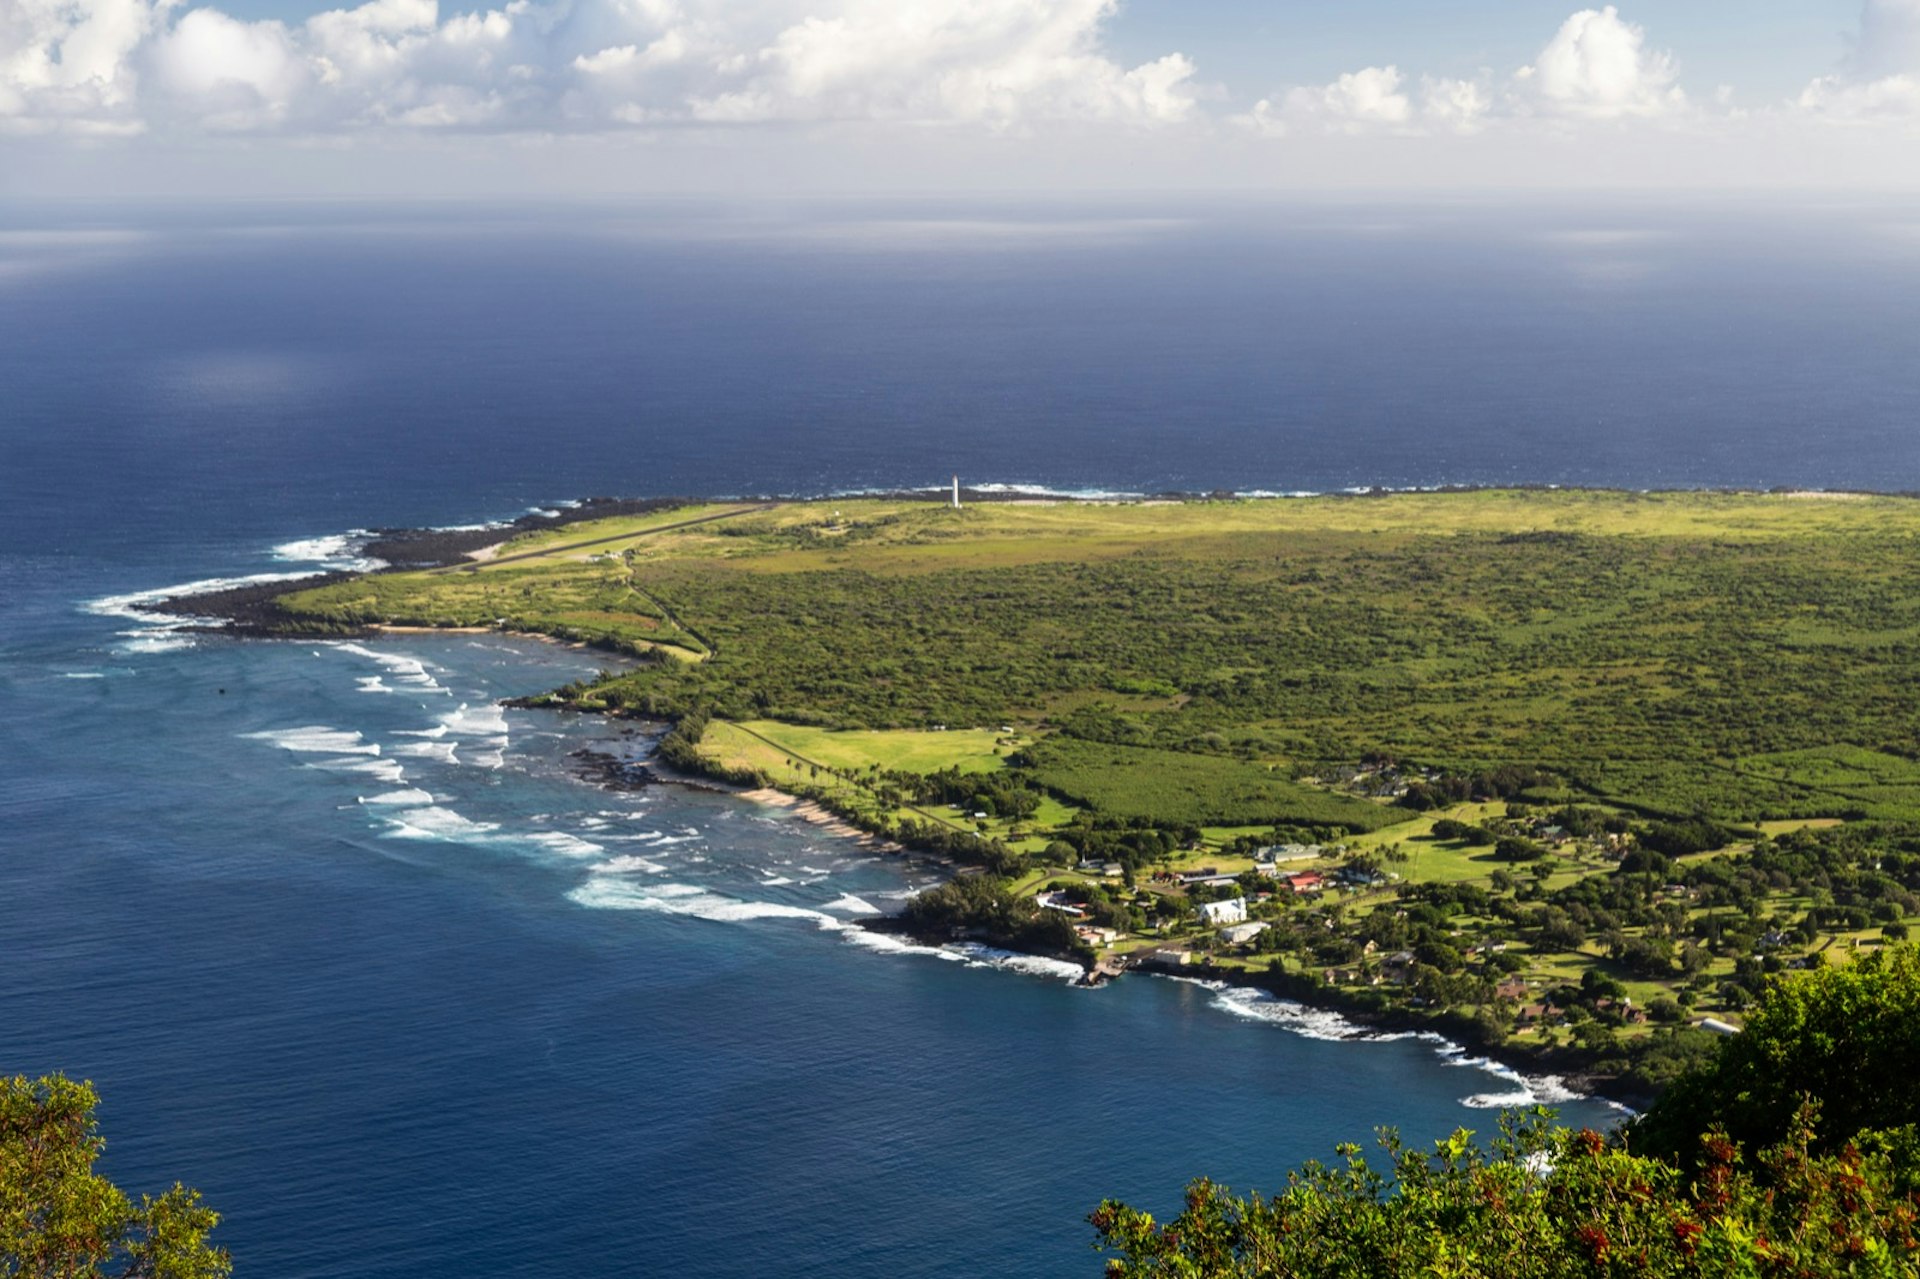 Looking down at the peninsula of Kalaupapa from the top of one of the nearby cliffs, with a tiny village visible on the near shore